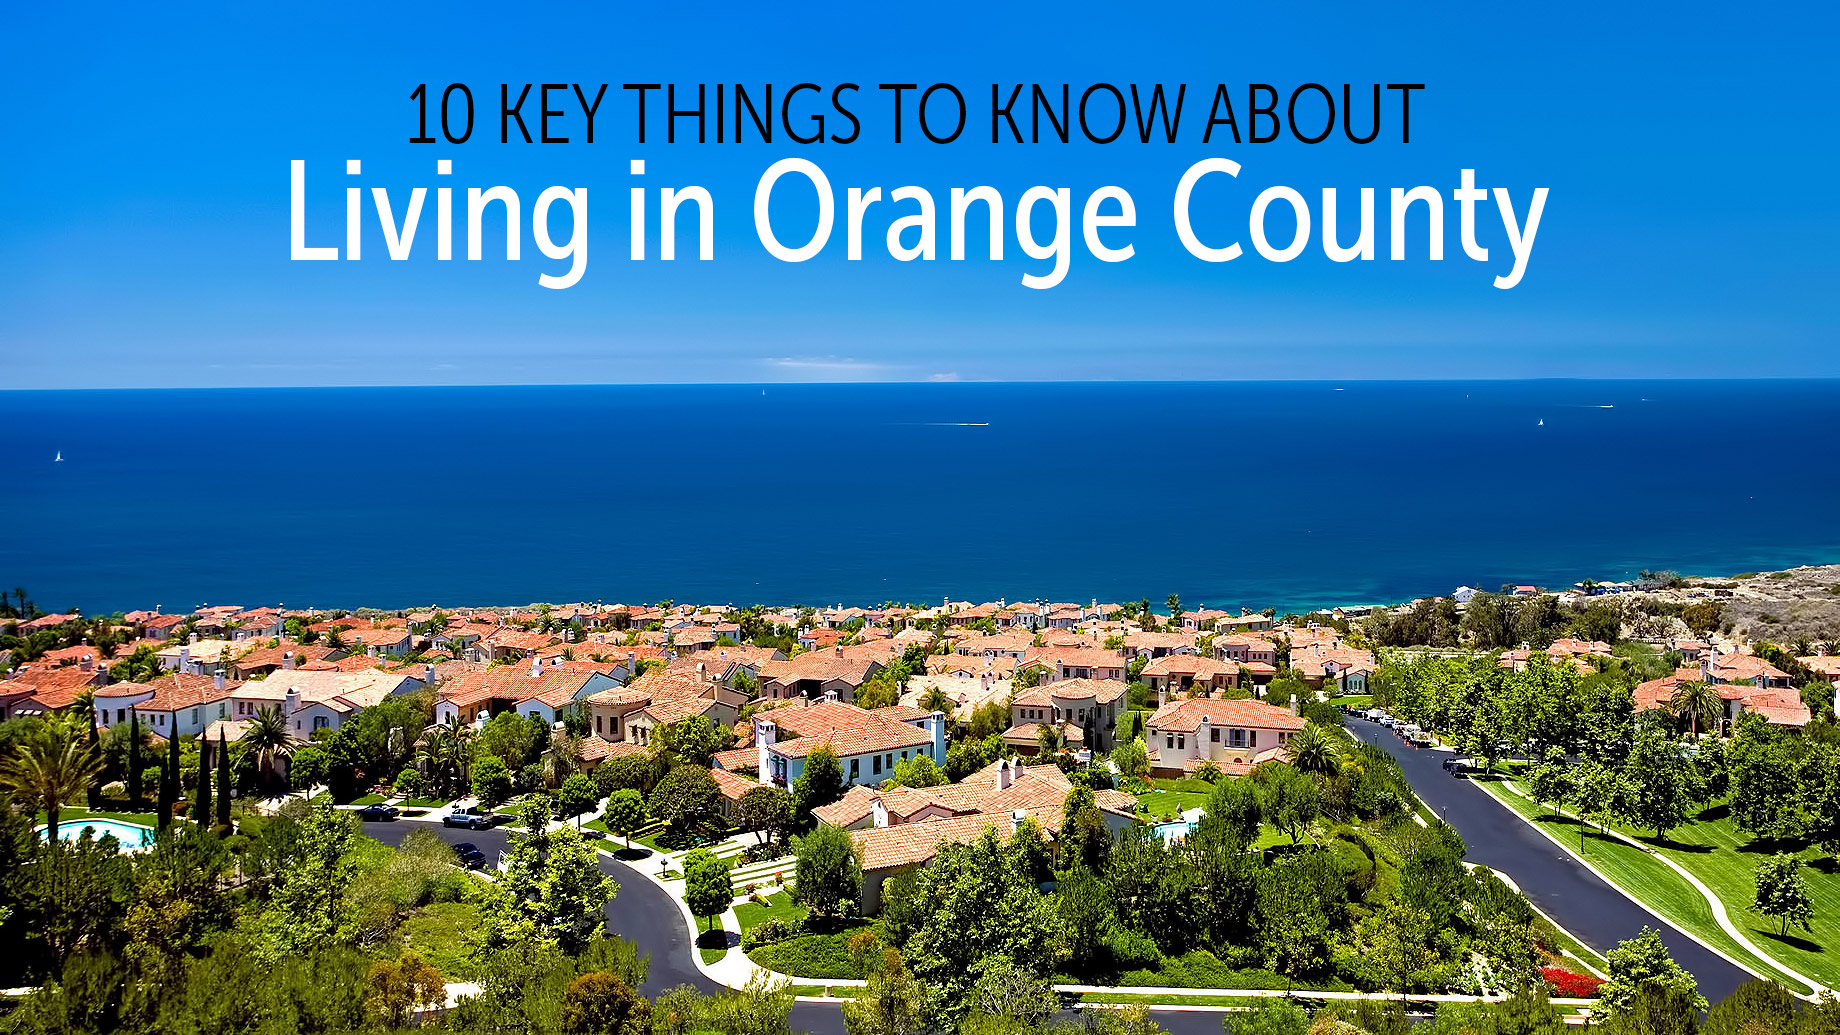 Southern California Real Estate - 10 Key Things to Know About Living in Orange County